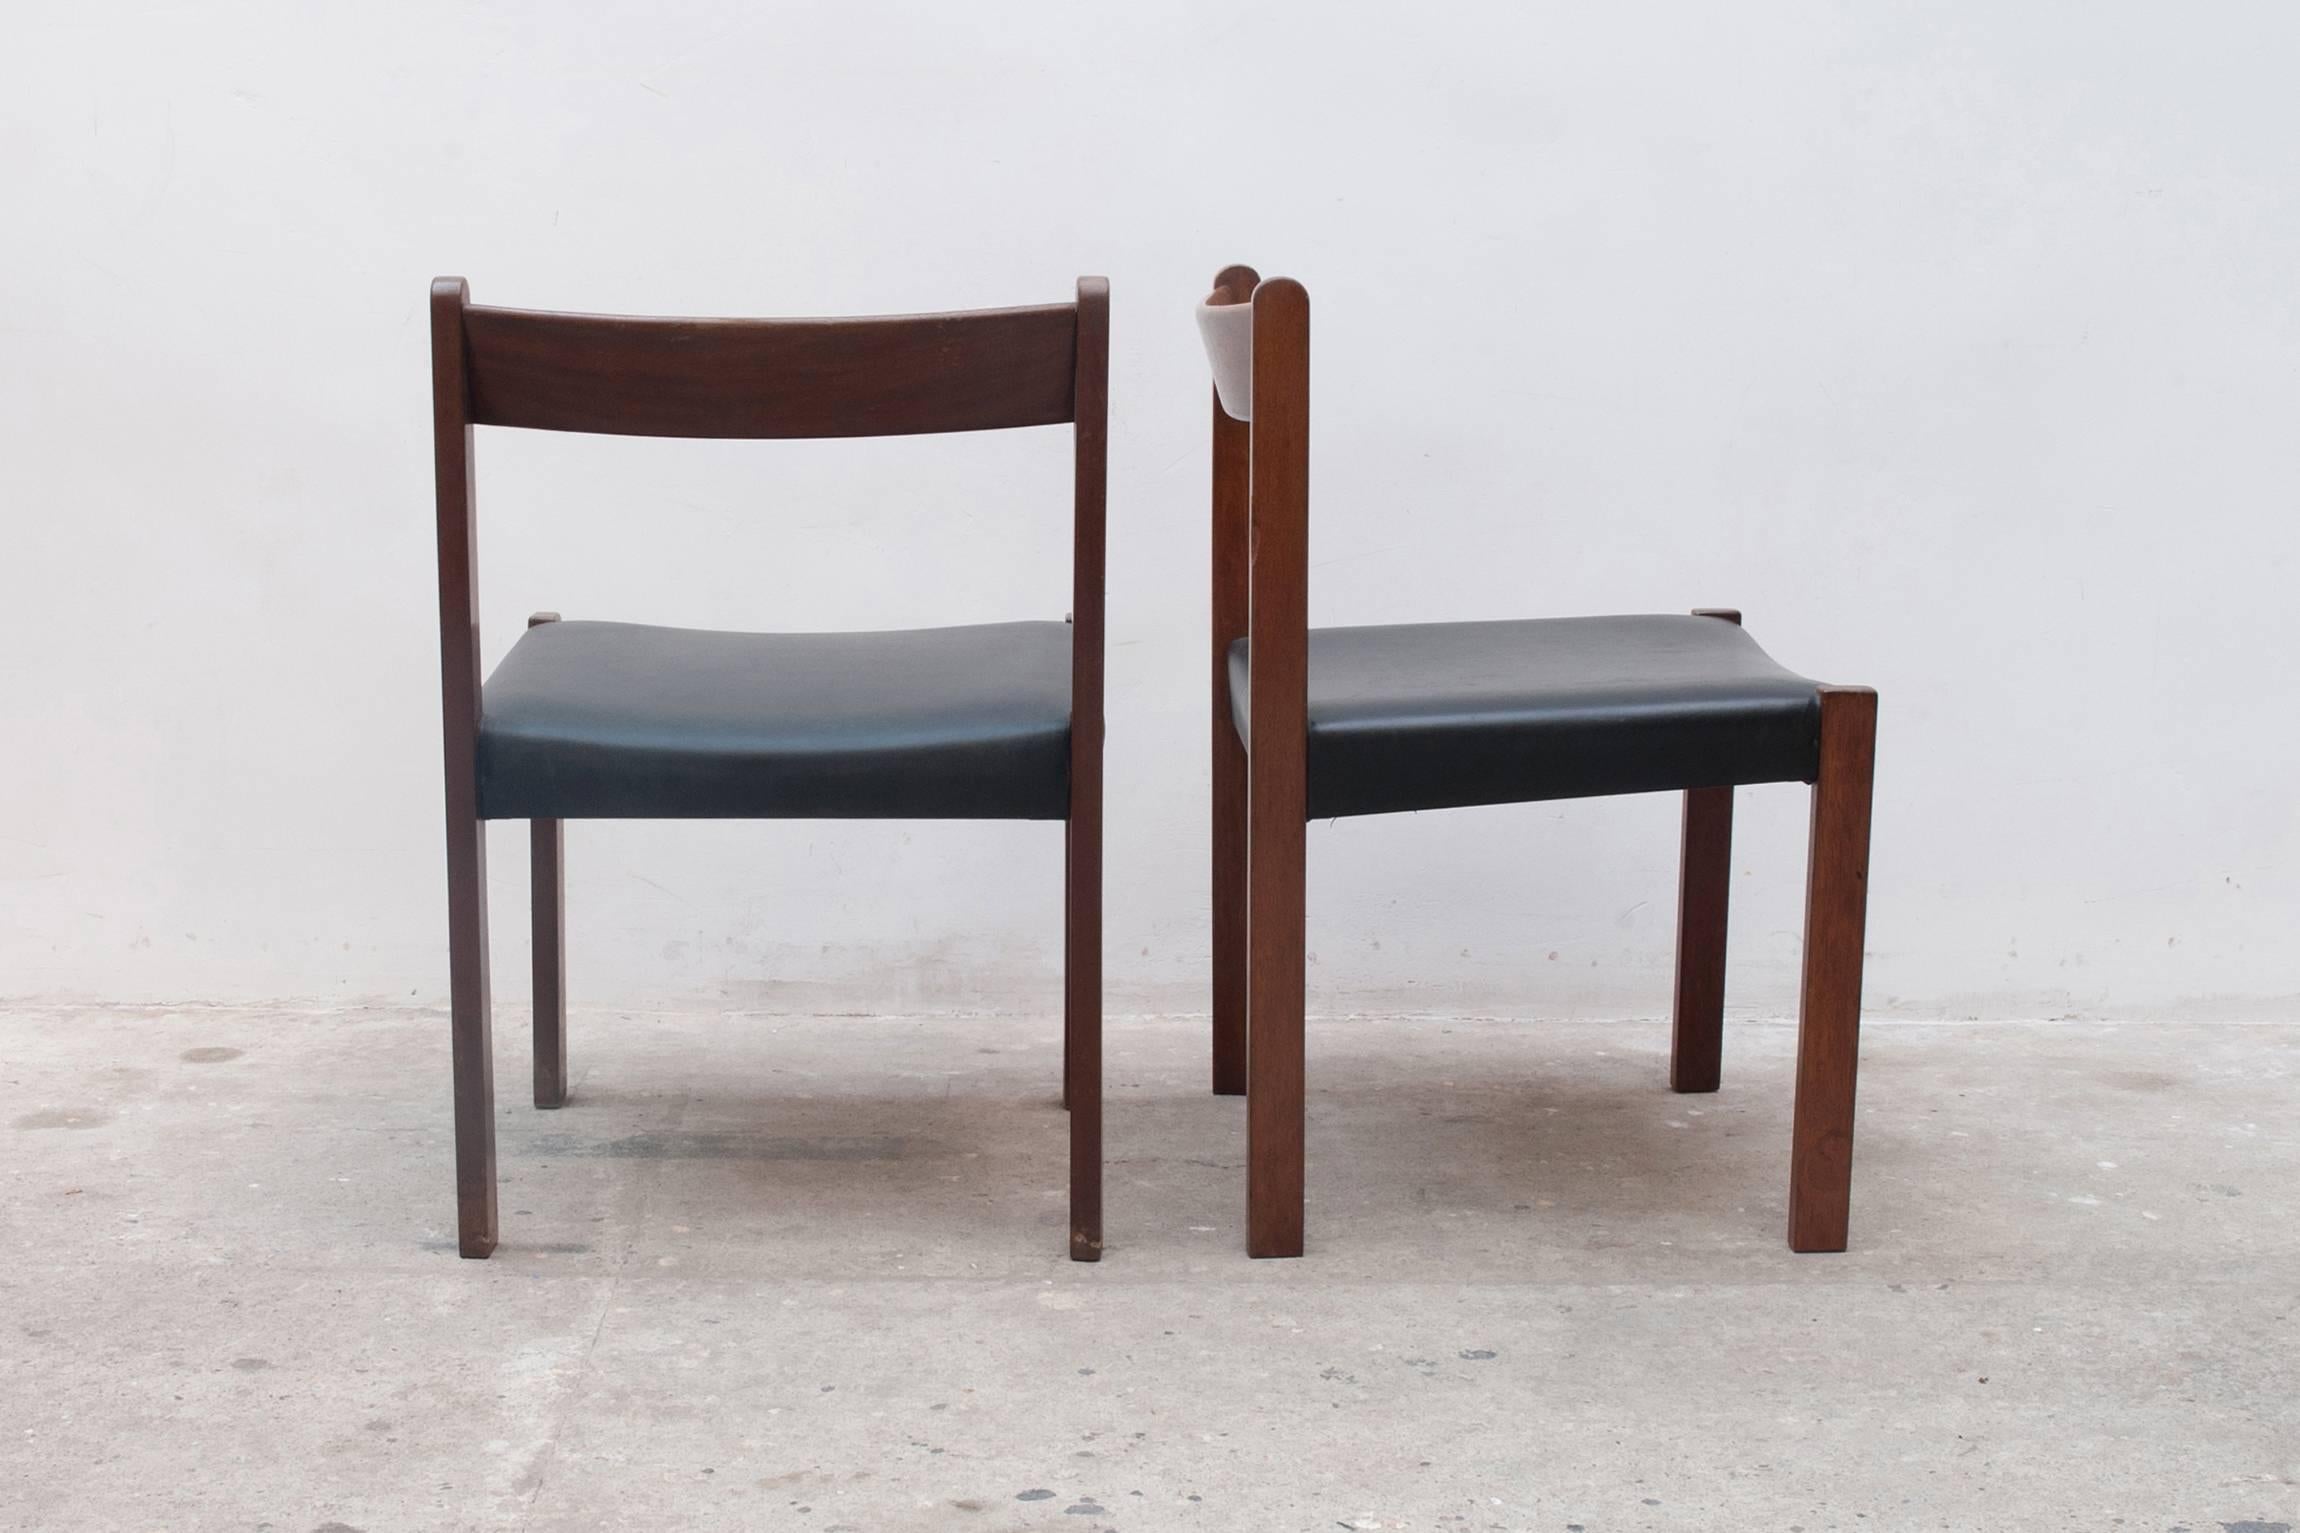 These minimalistic modern design dining chairs were designed by the Belgium Architect Alfred Hendrickx for Belform in 1962.
The six chairs made of rosewood and the seating are in black vinyl leather
Six pieces of high-quality chairs in a very good